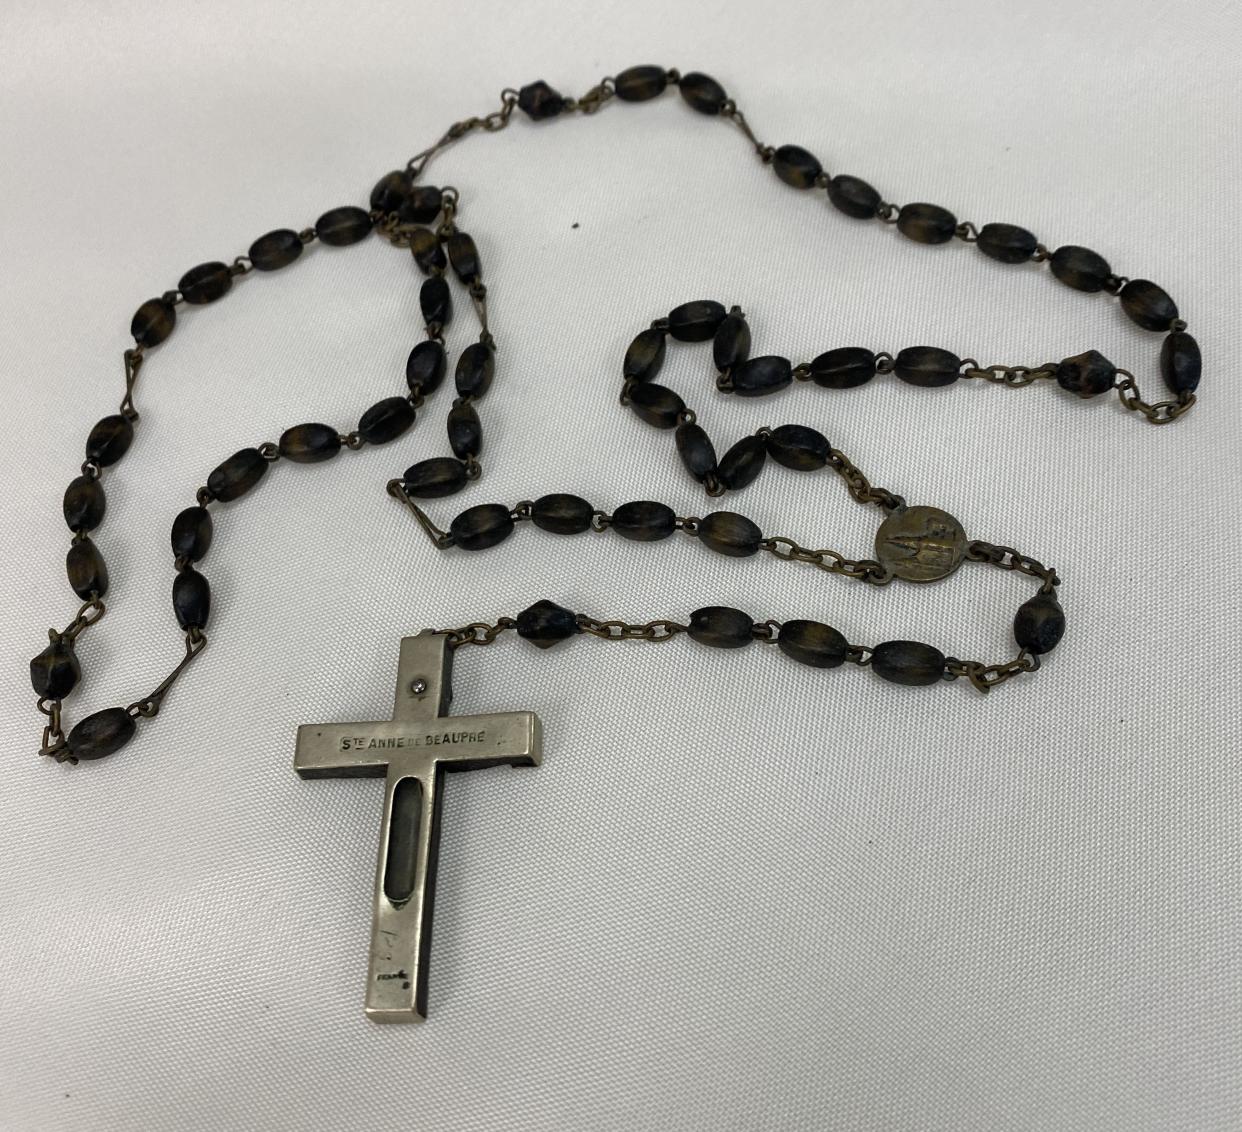 Akron funeral director David Anthony has the rosary that his father, Paul, was holding when he was killed in 1974.